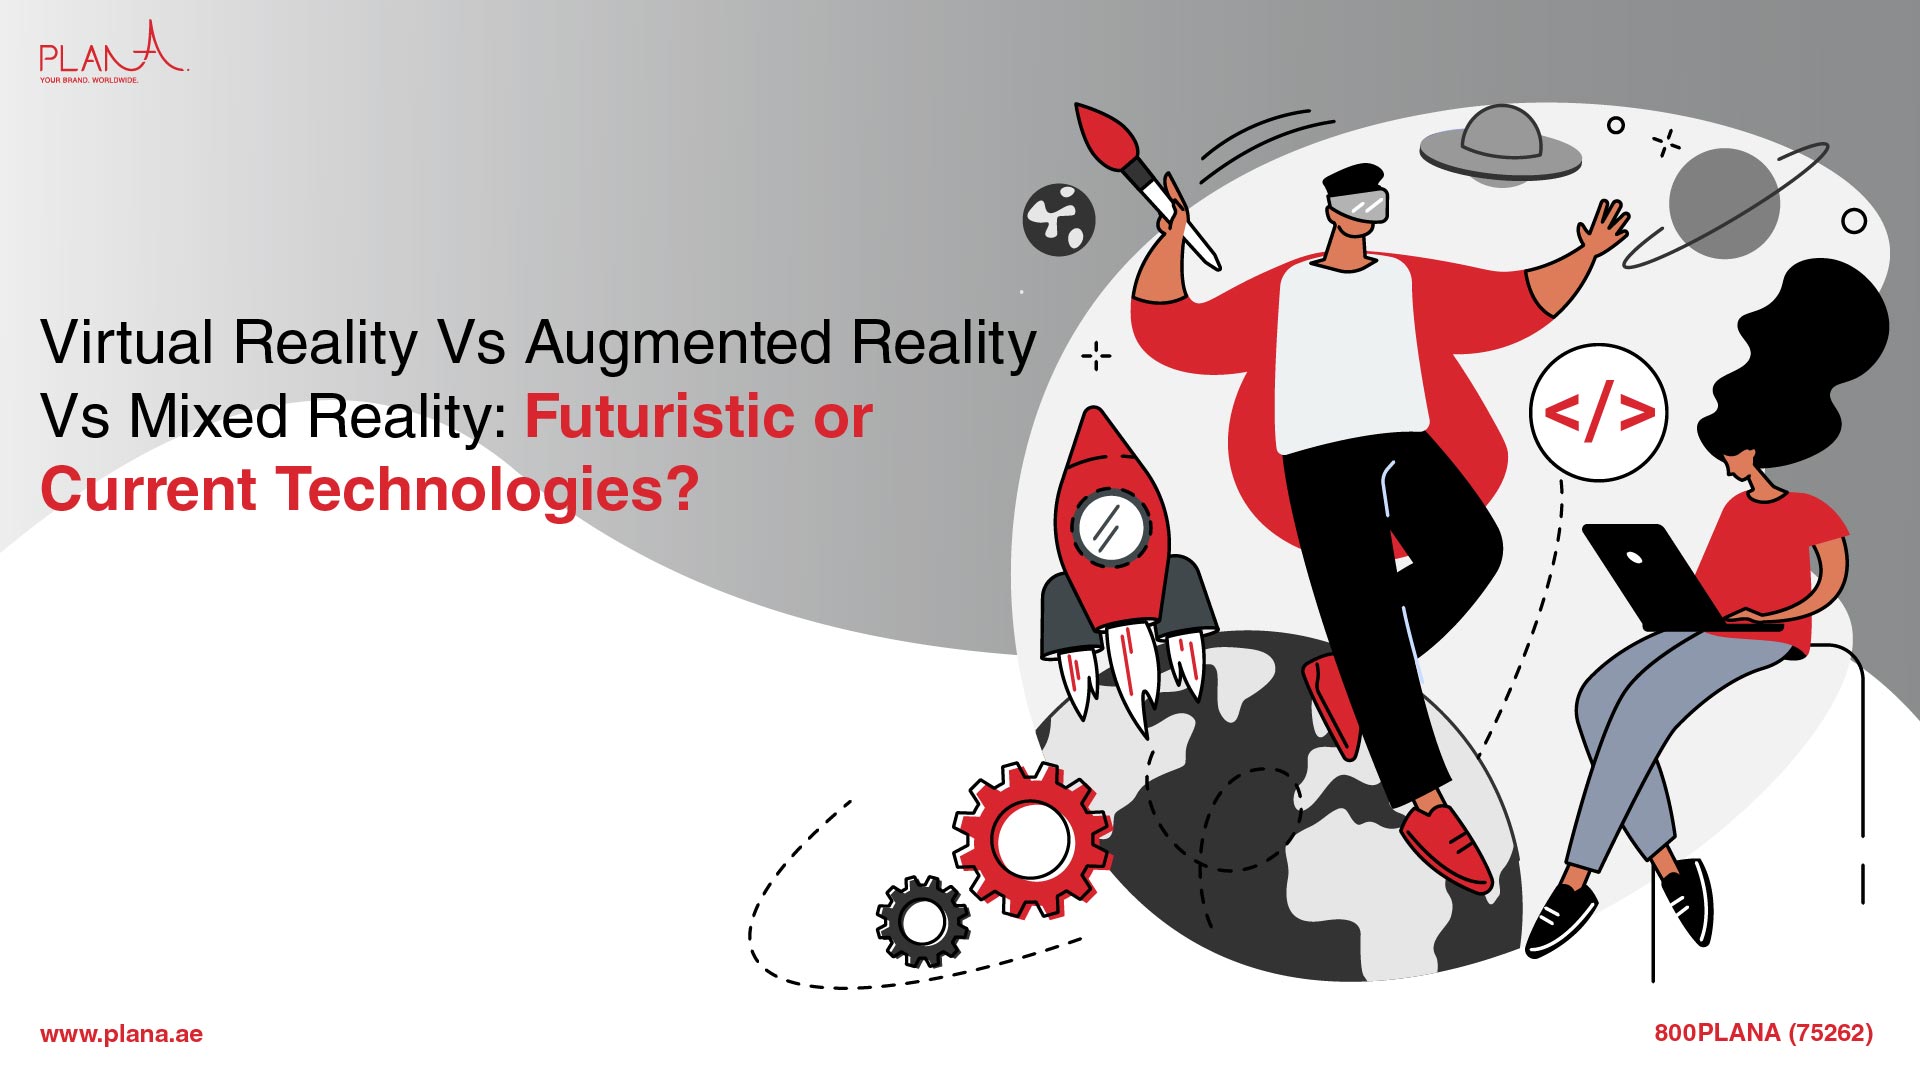 Virtual Reality Vs Augmented Reality Vs Mixed Reality: Futuristic or Current Technologies?